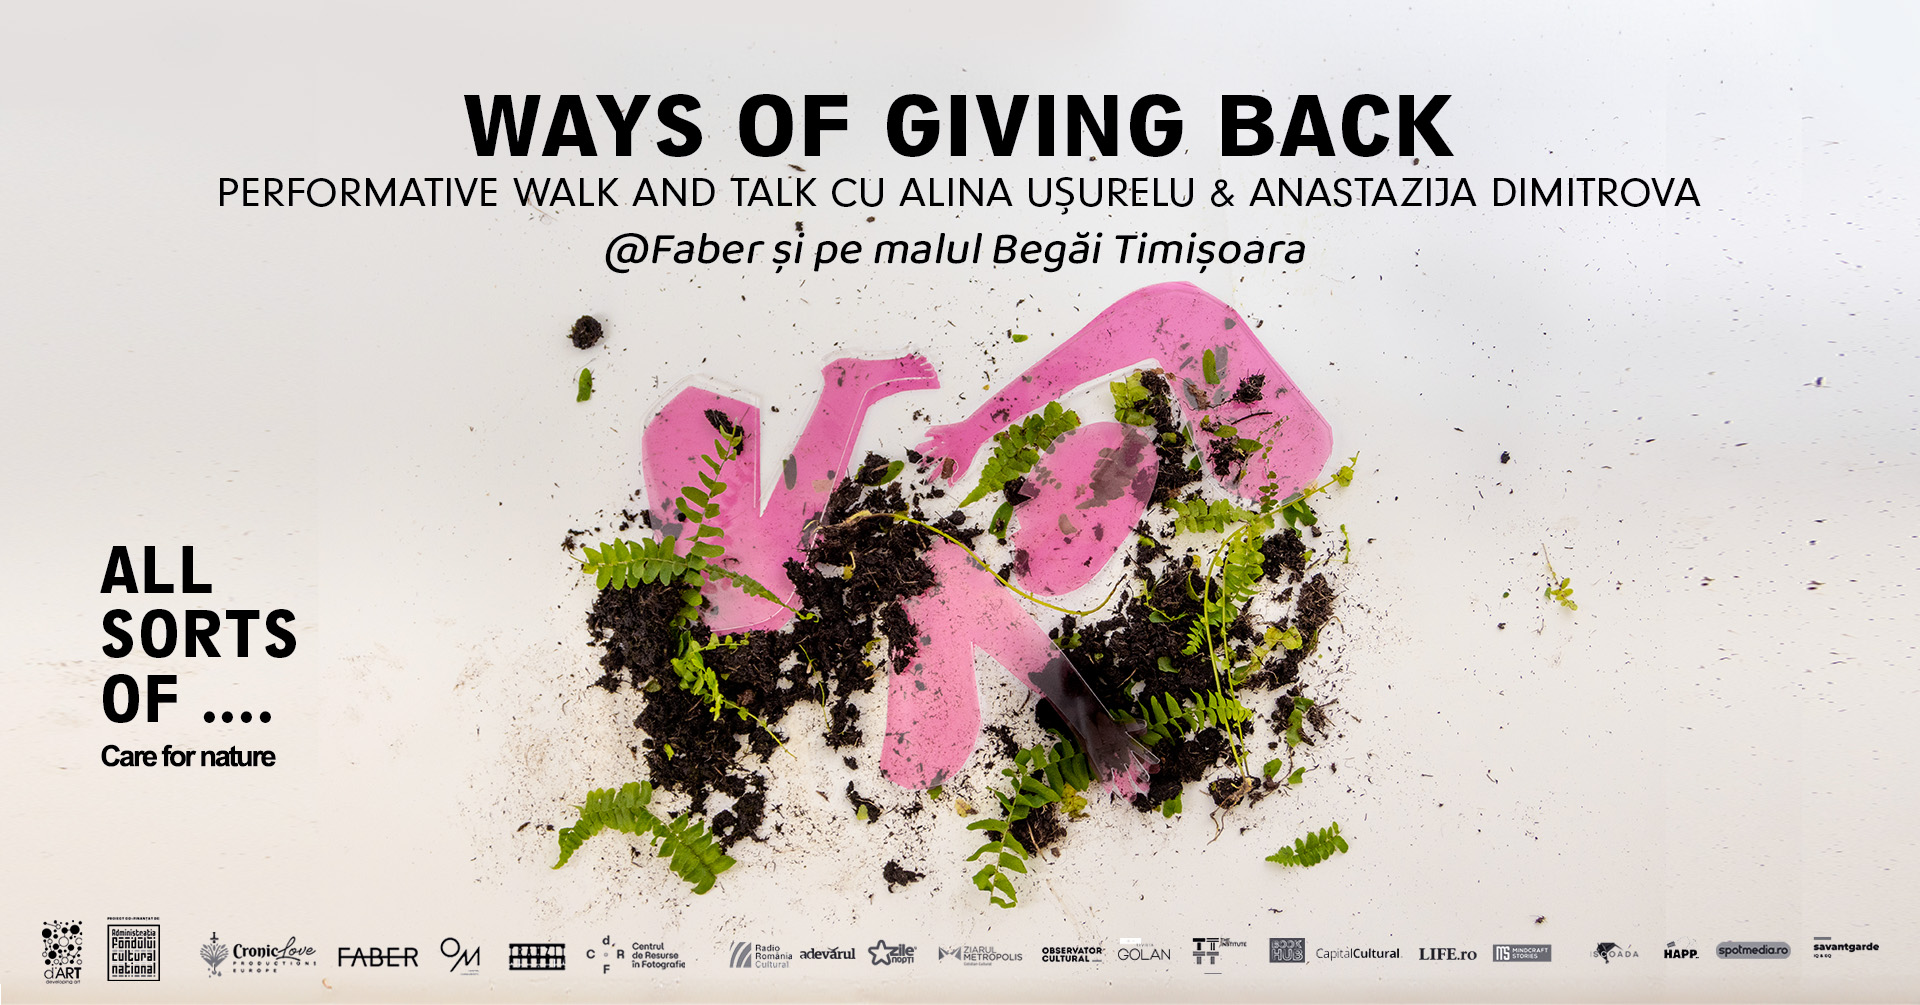 All Sorts of... Care for Nature - Ways of Giving Back - performative walk and talk